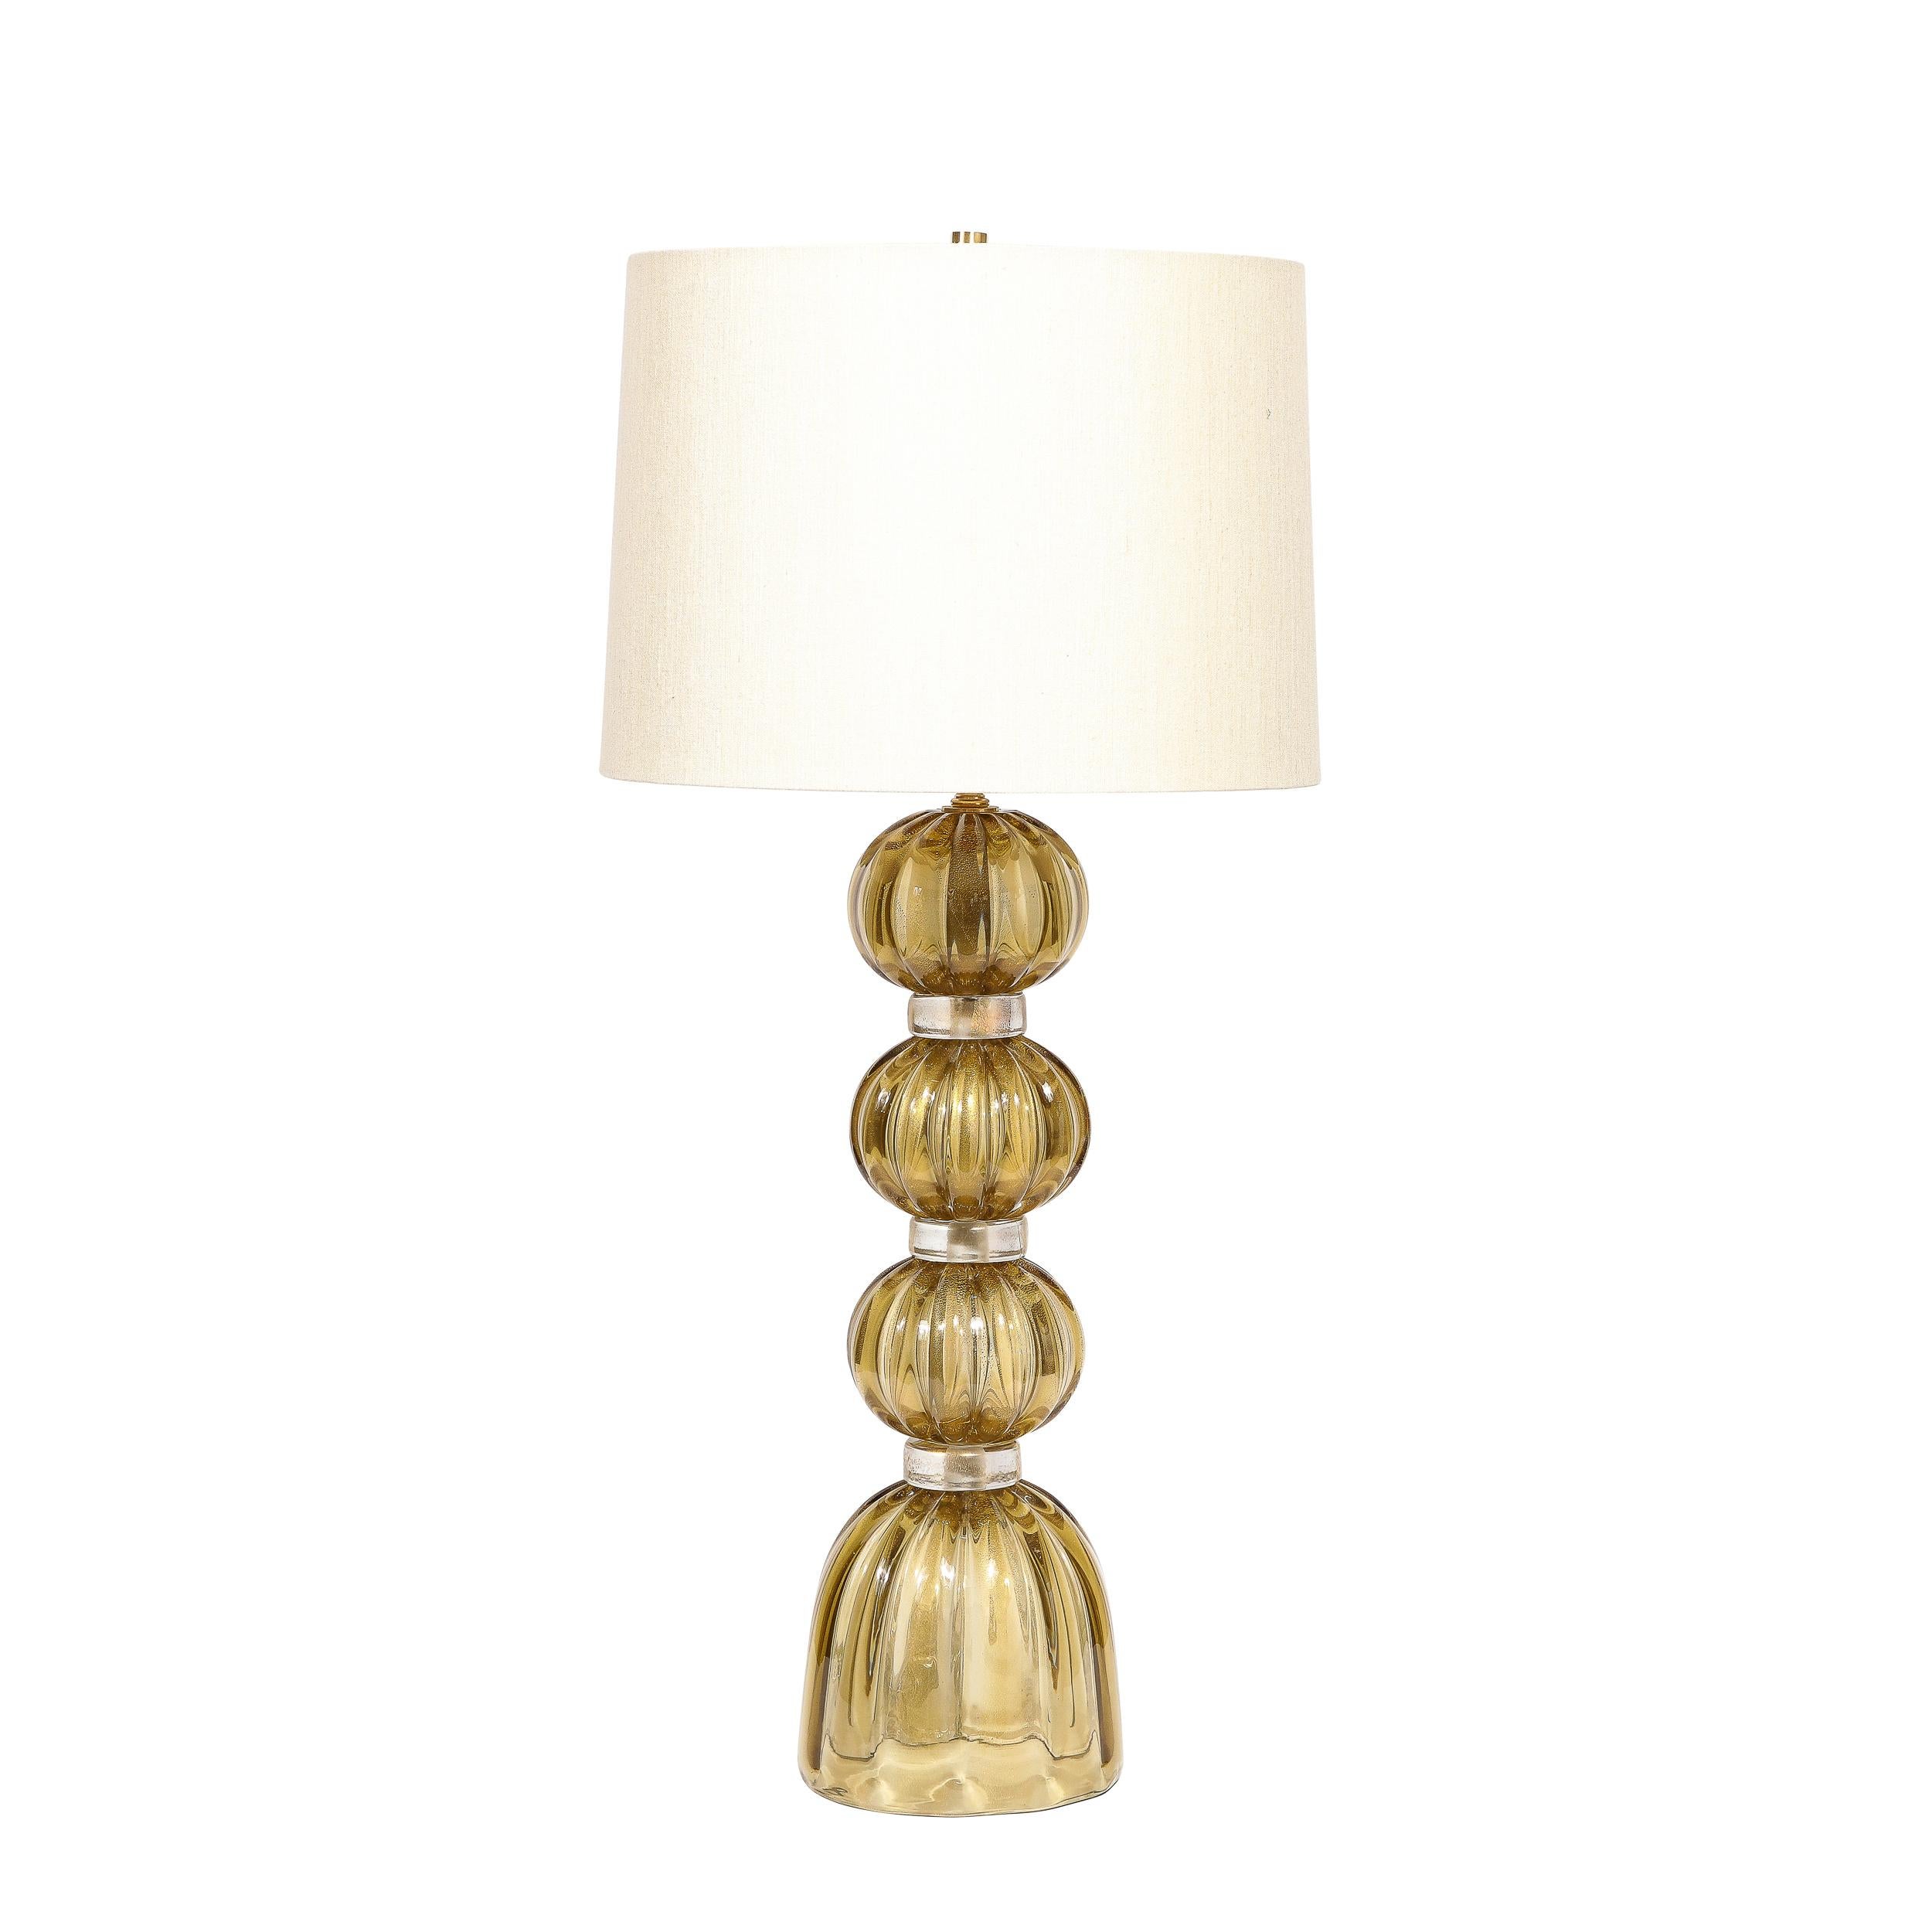 
This beautiful and refined pair of table lamps were handblown in Murano, Italy- the island off the coast of Venice renowned for centuries for its superlative glass production. They sculptural undulating cylindrical bodies in handblown reeded